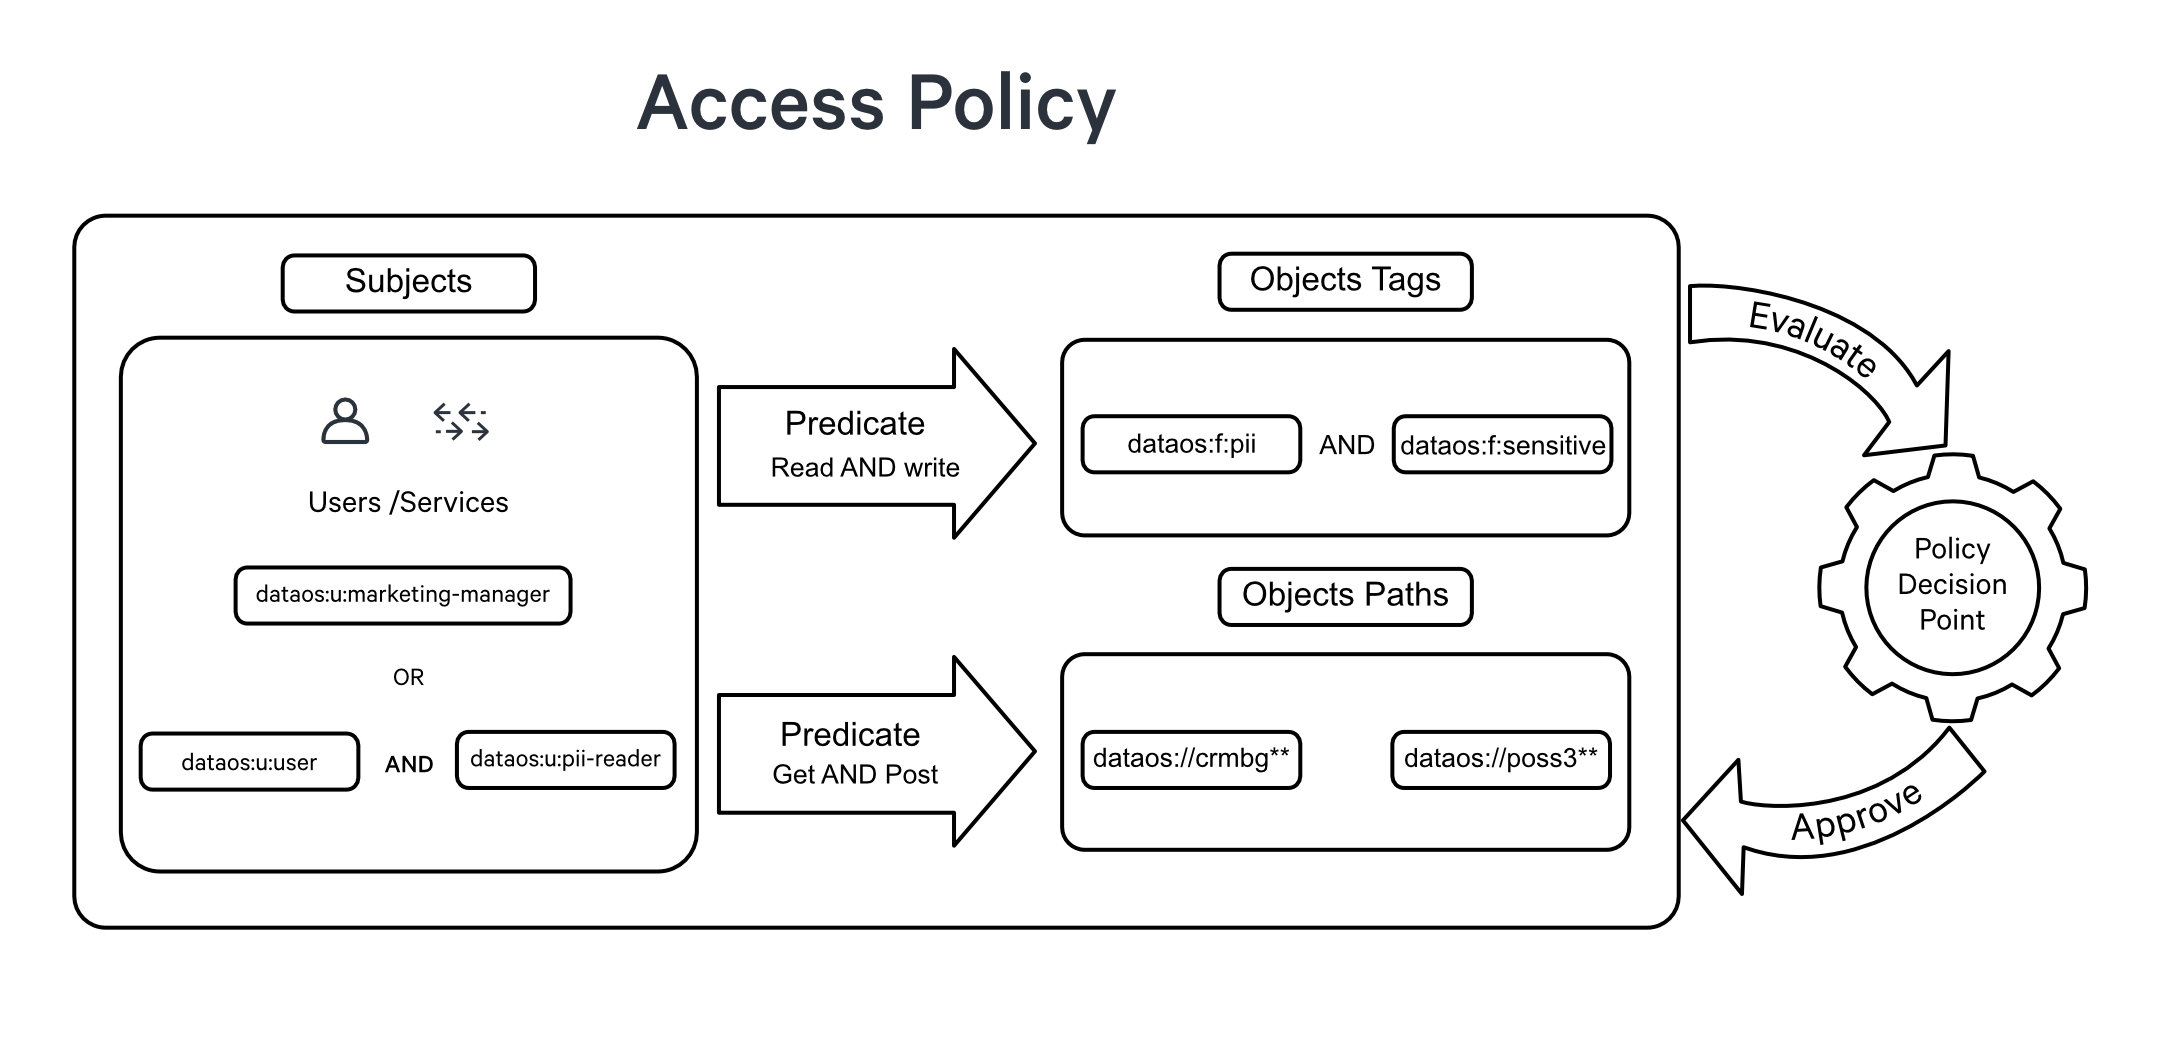 governance-policies-access-policy.jpg